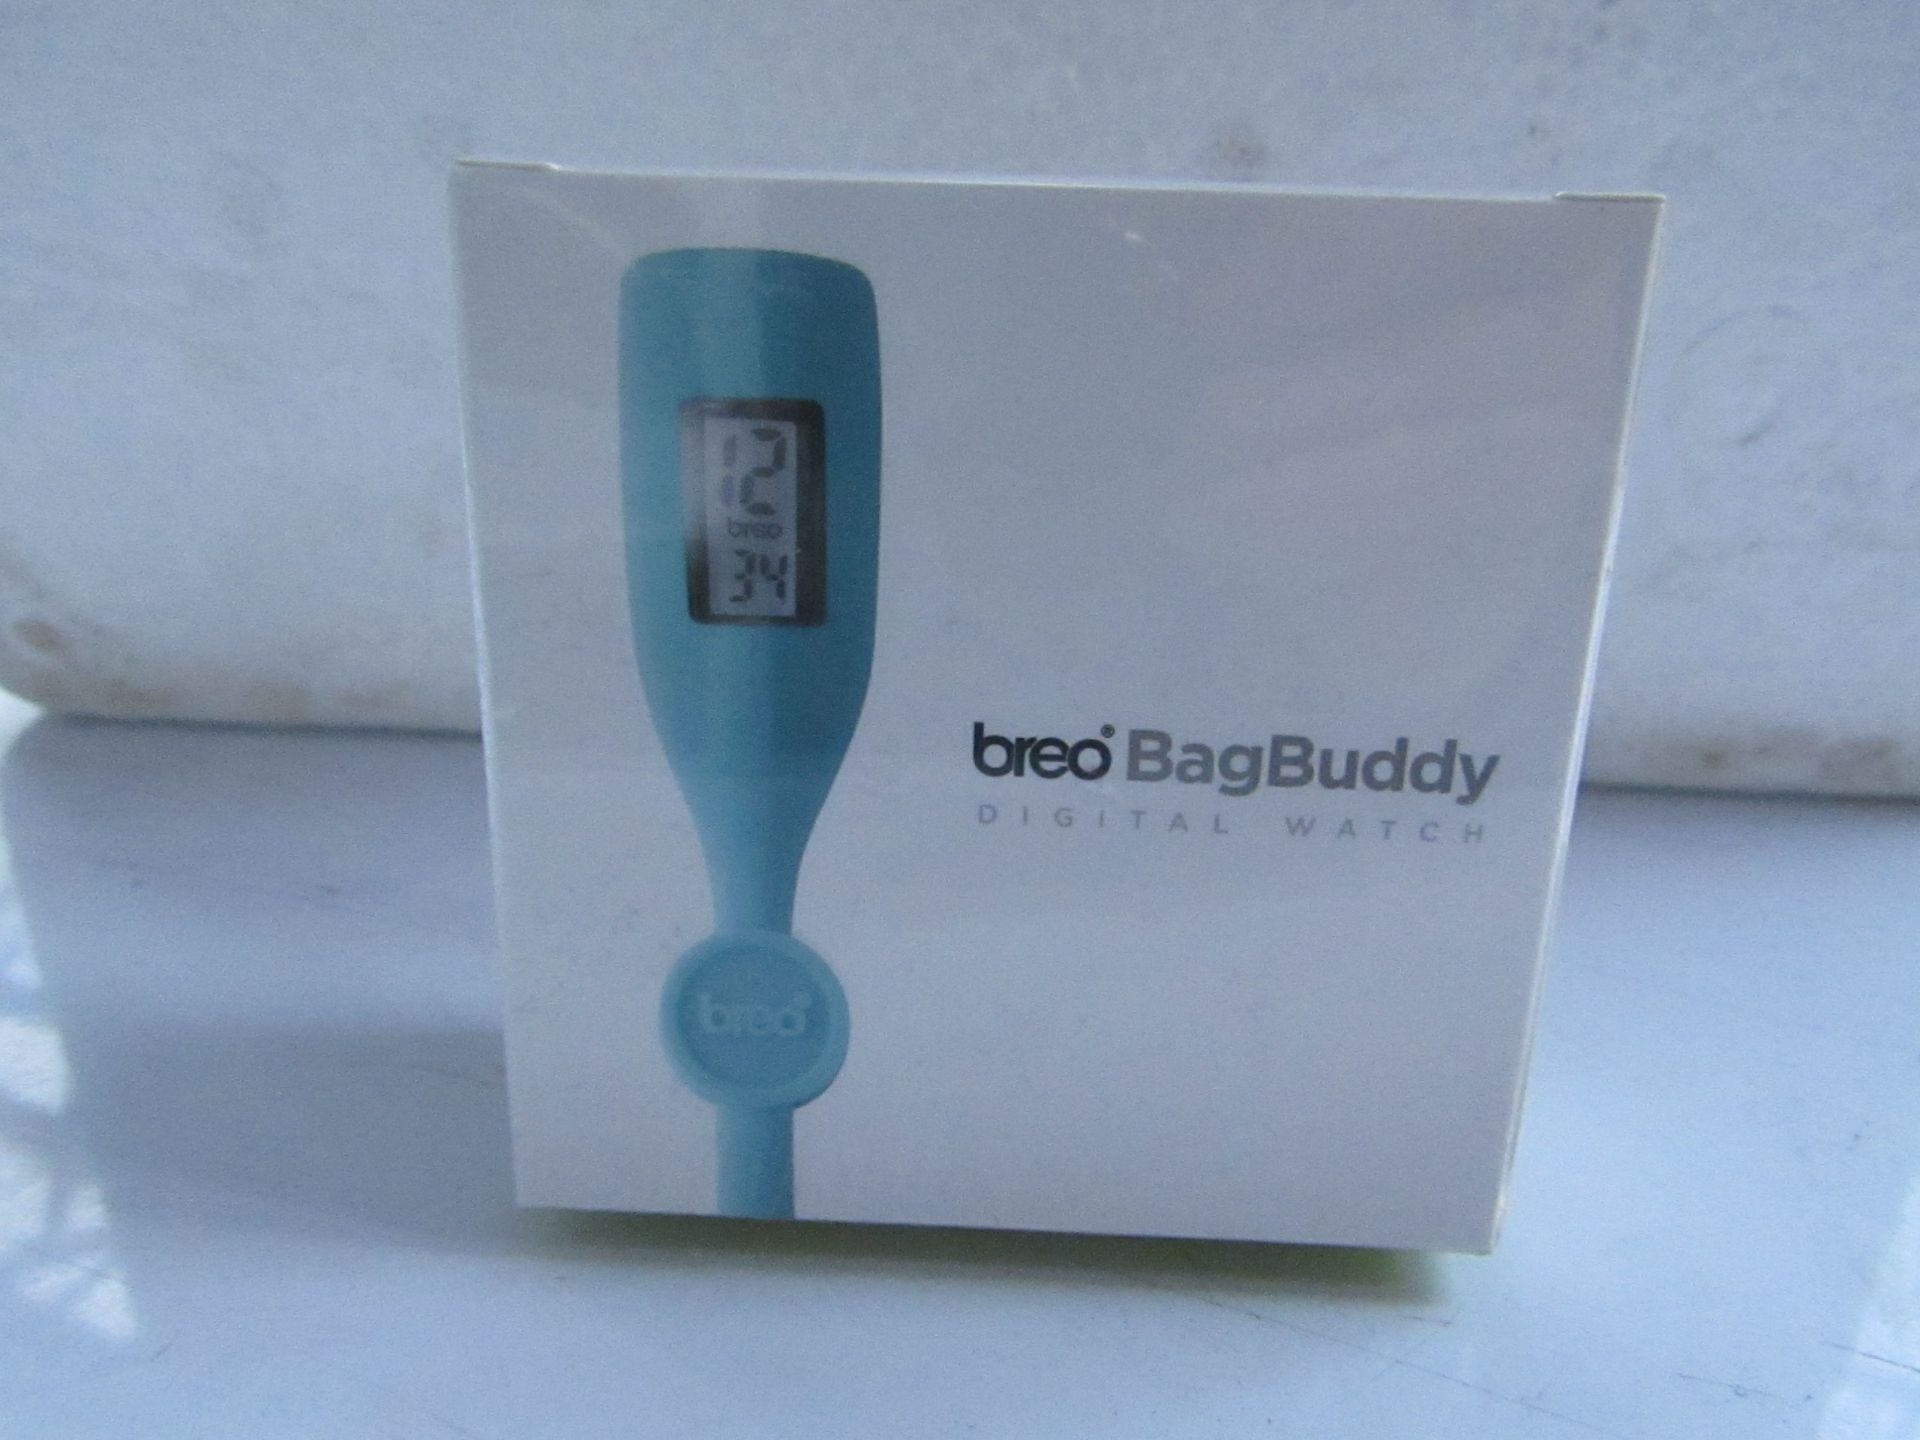 5x Breo Bag Buddy's in Aqua Blue, new and boxed